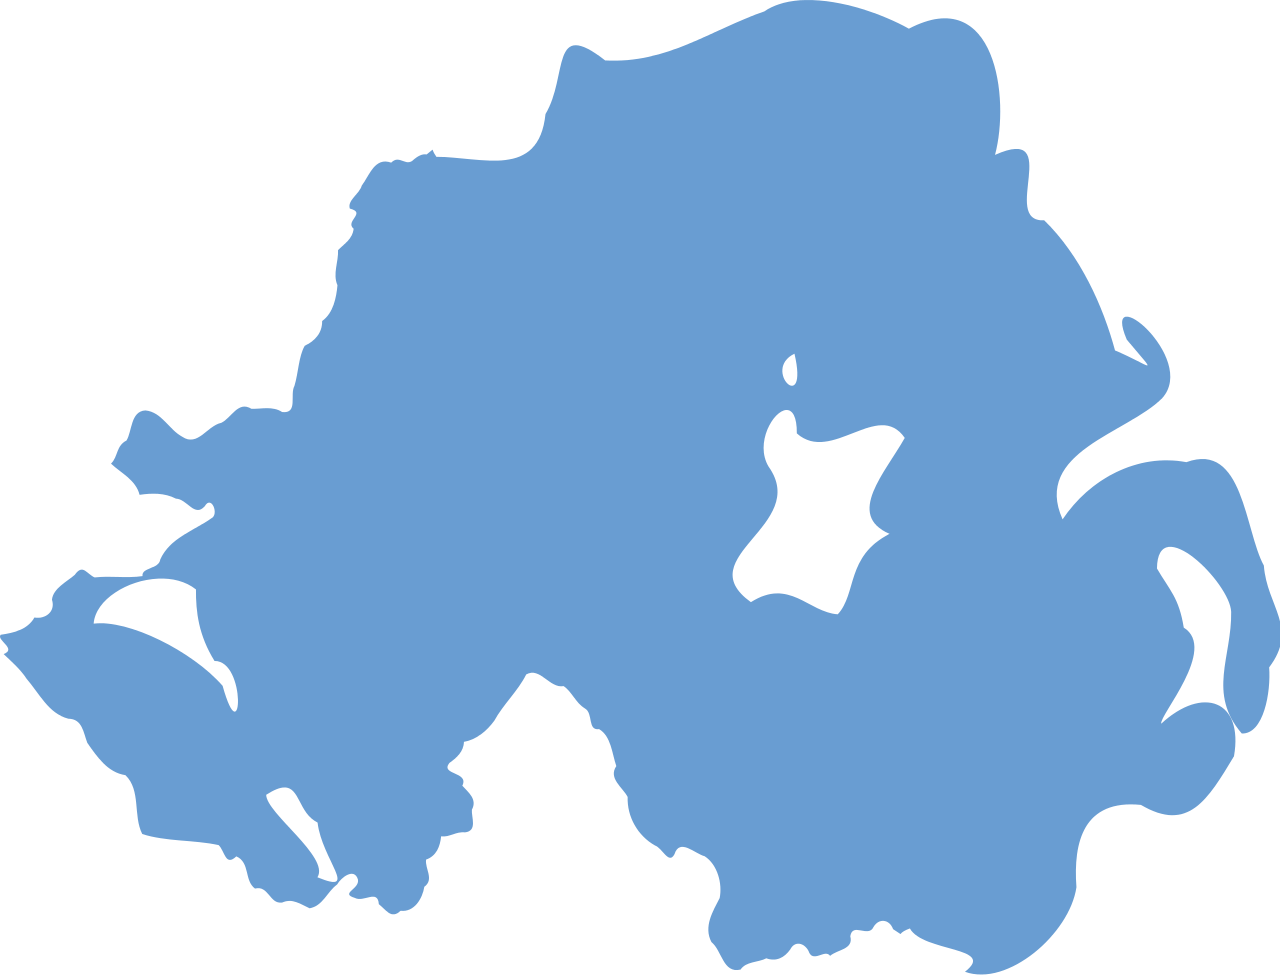 File:Northern Ireland outline in blue.svg - Wikipedia